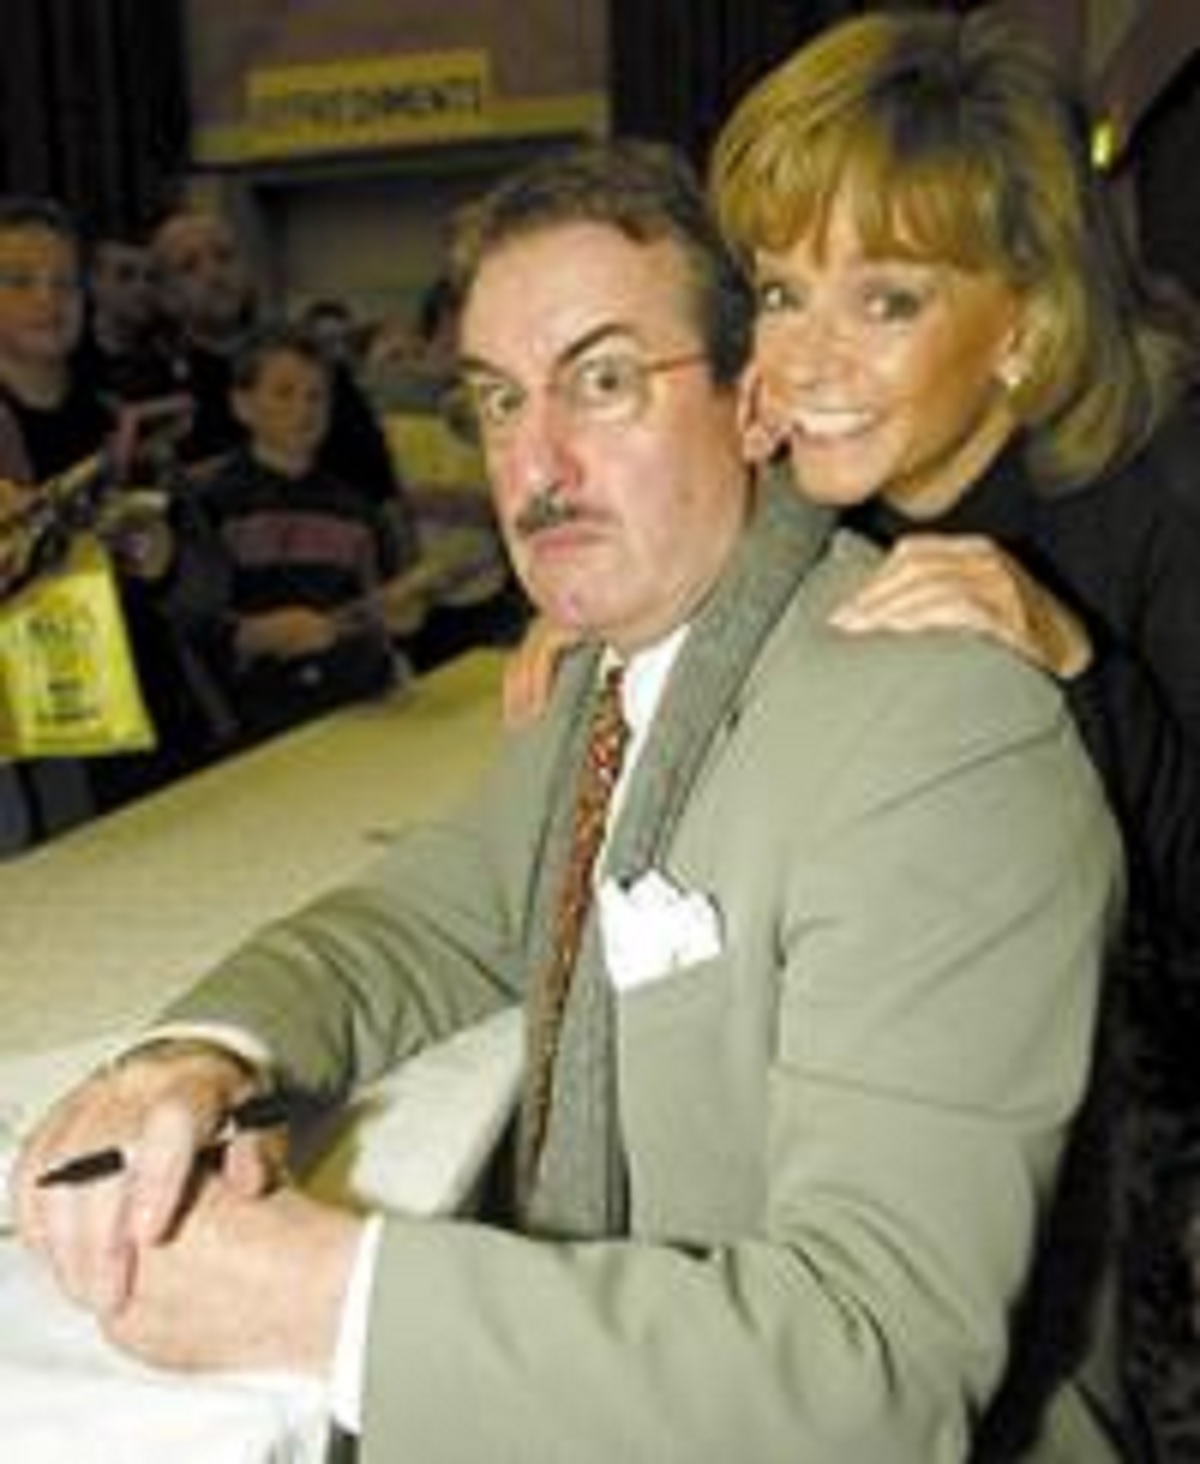 Smile Marlene - John Challis and Sue Holderness take a break from signing autographs